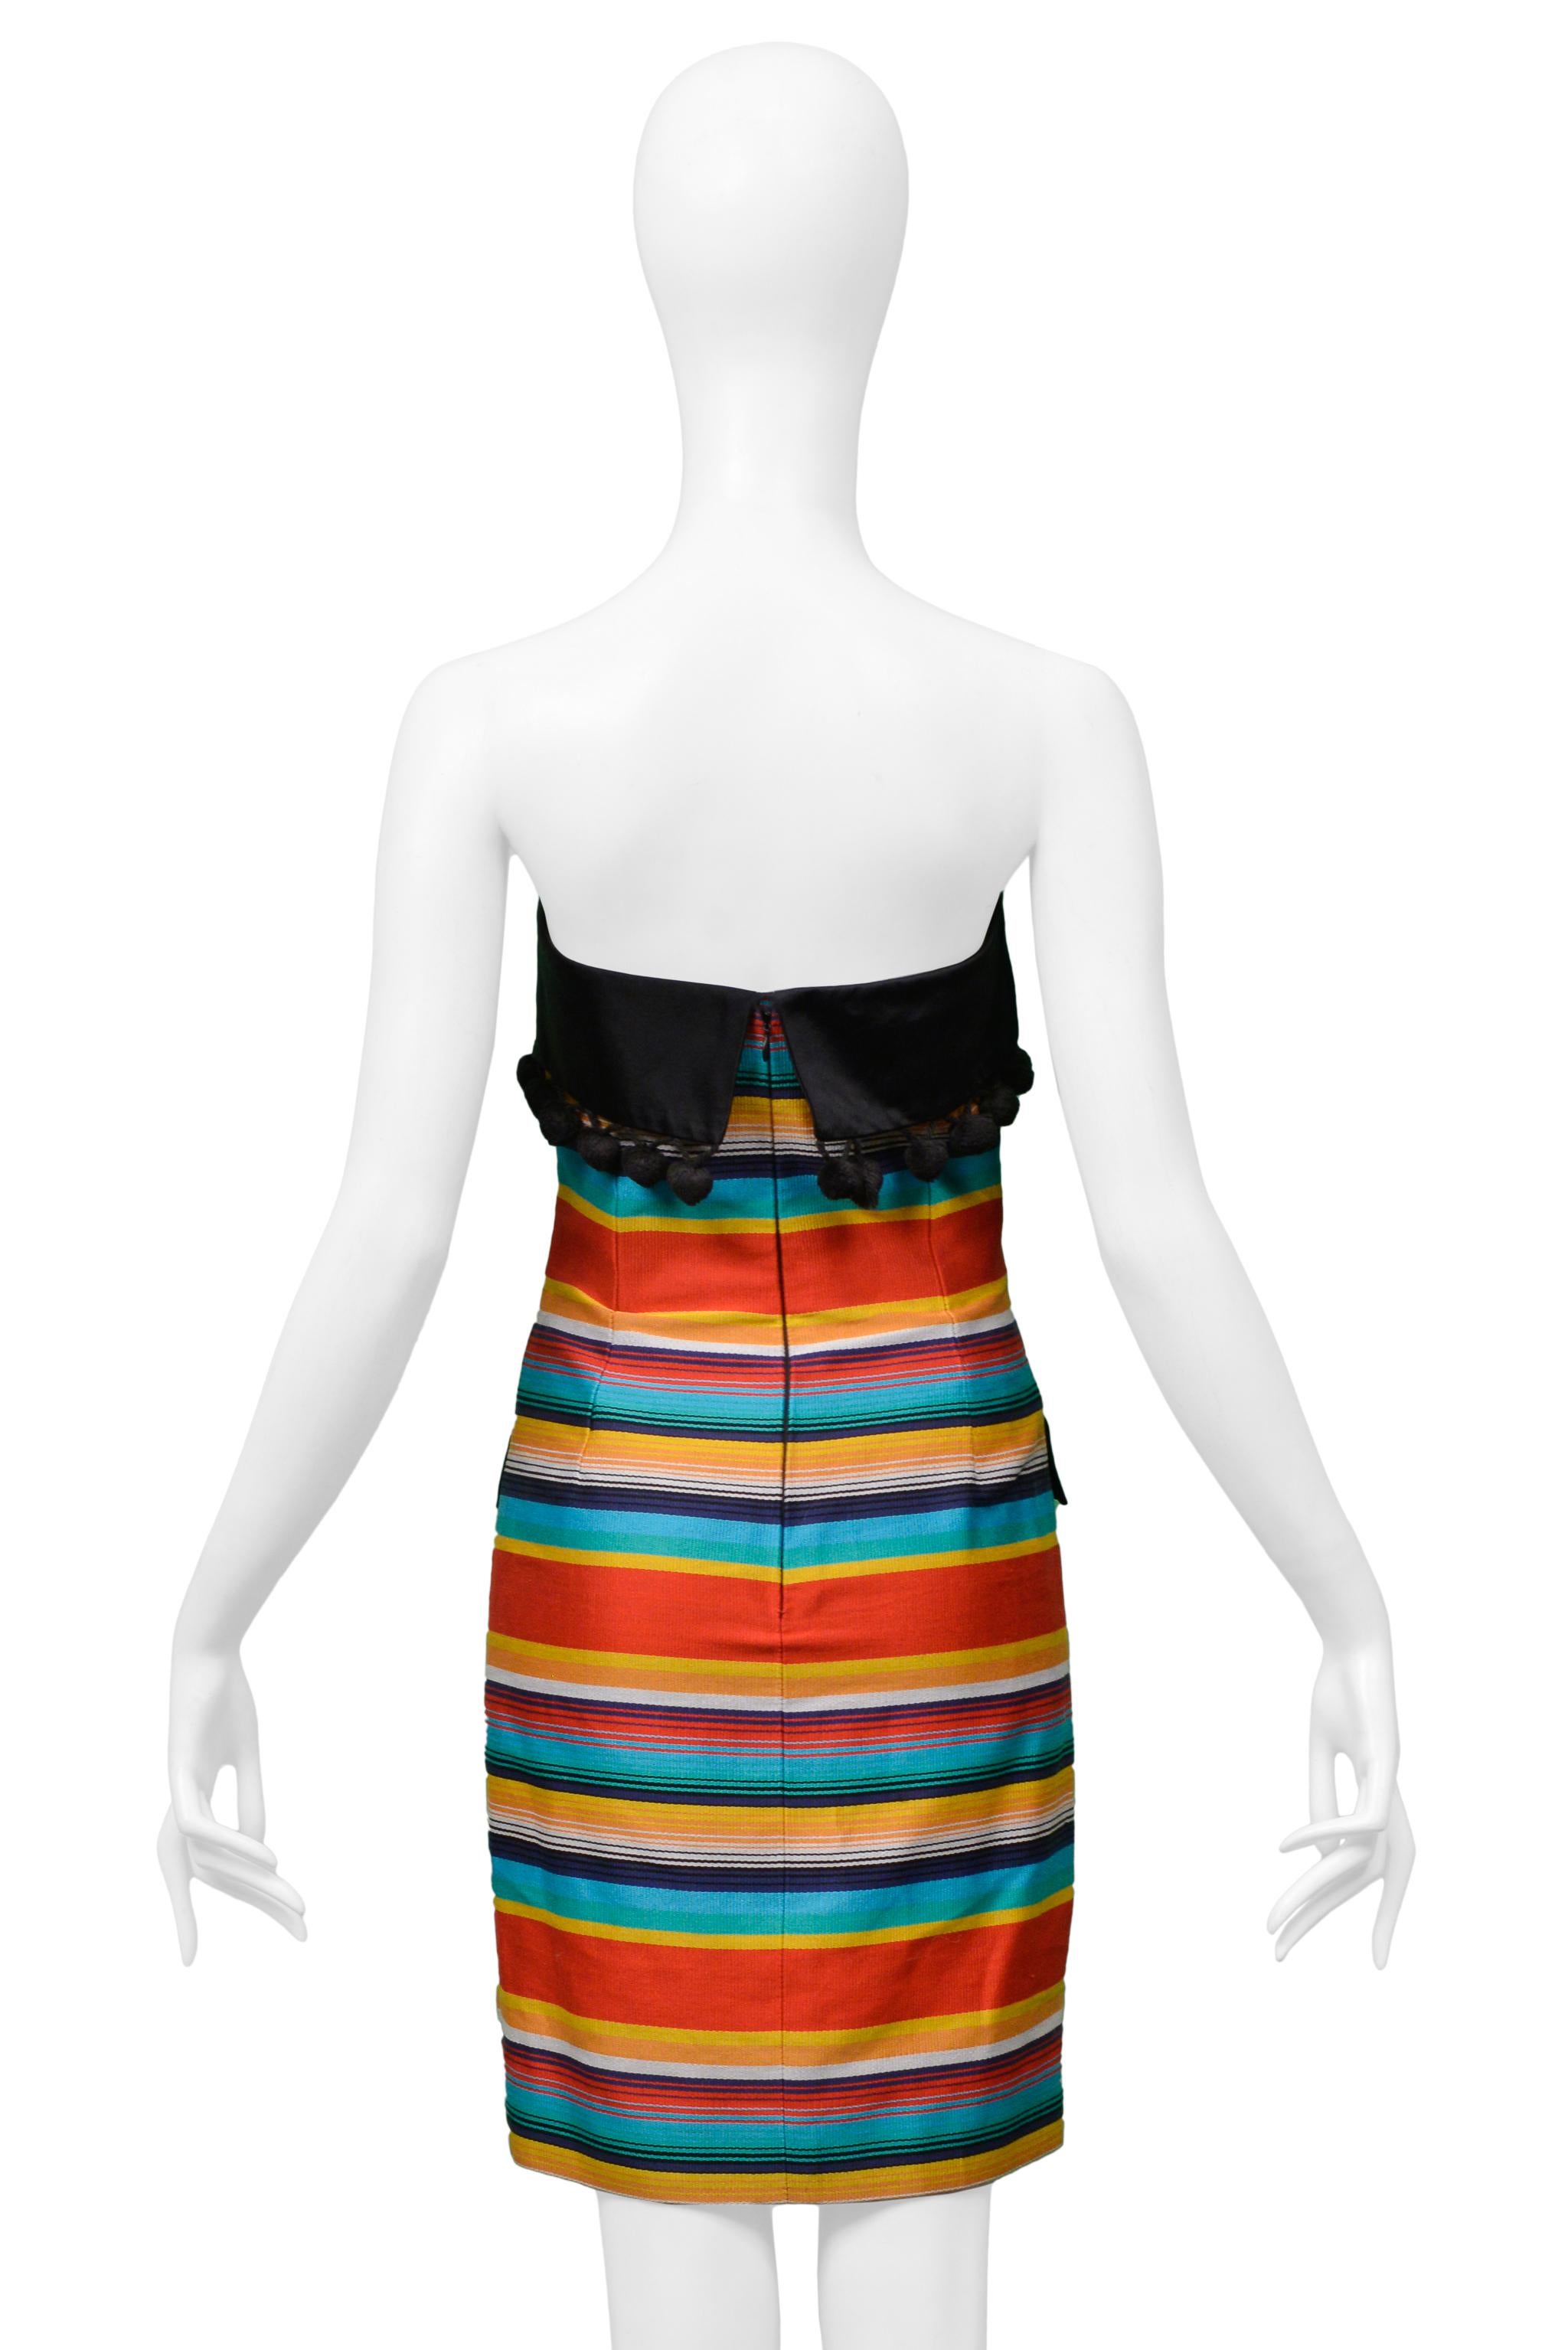 Women's Perry Ellis By Marc Jacobs Striped Strapless Dress 1992 For Sale